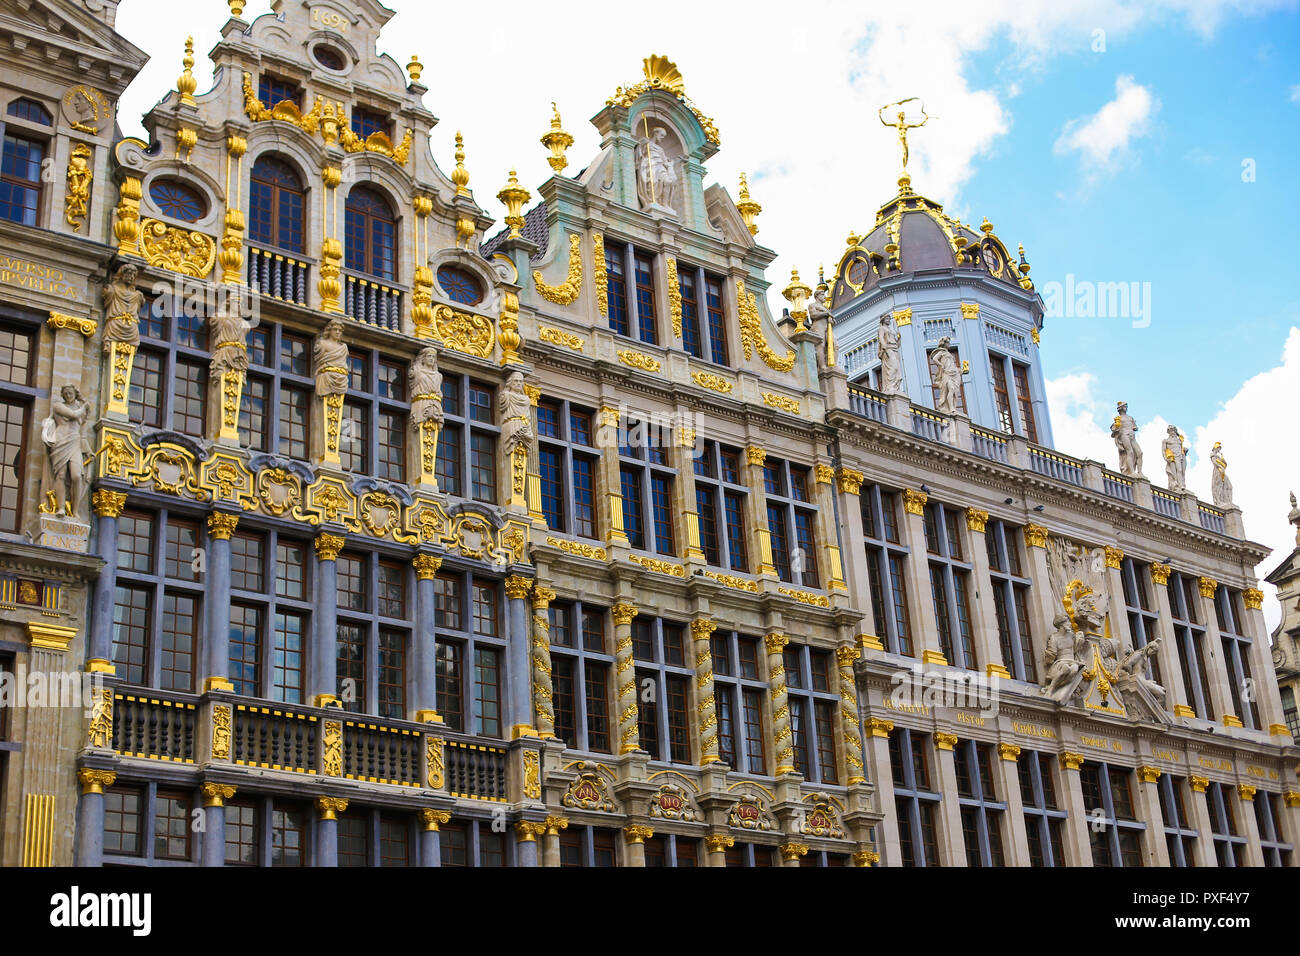 Close up Grand Place buildings in Brussels, central square in Belgium. Concept of european architecture and landmarks. Stock Photo